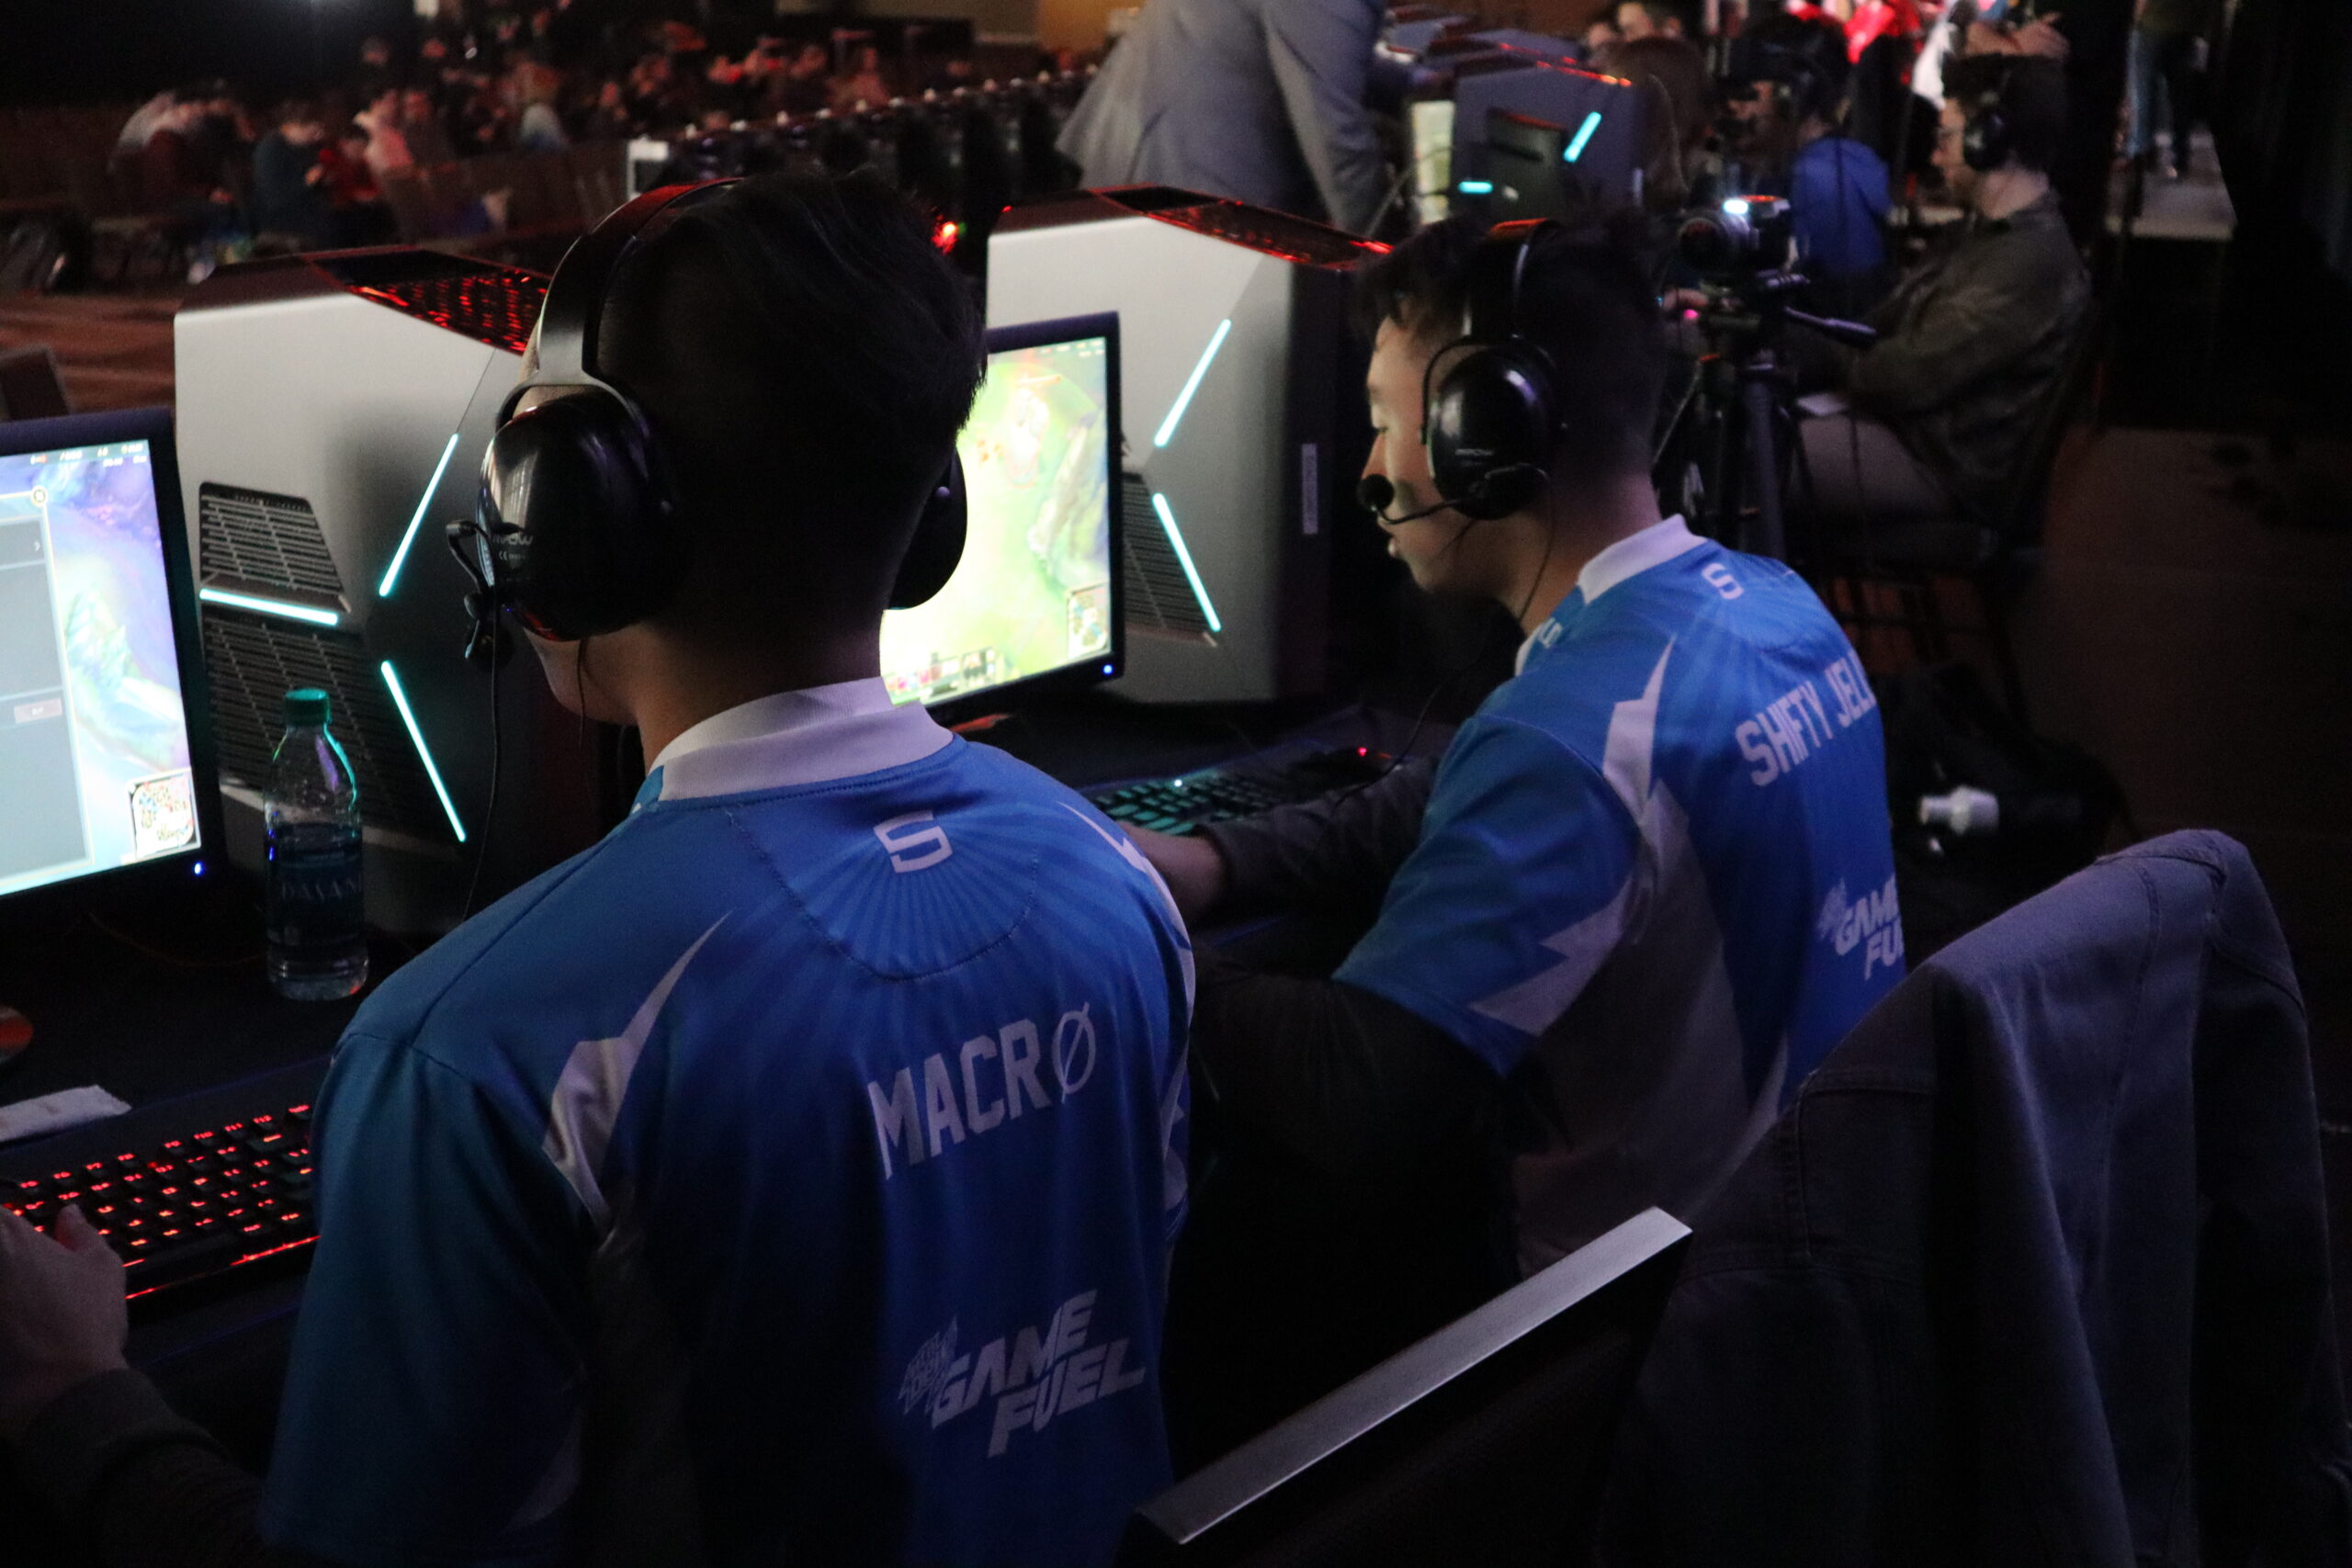 At Saint Peter’s University in New Jersey, leaders have worked to convince parents the esports provides viable career paths for students. 